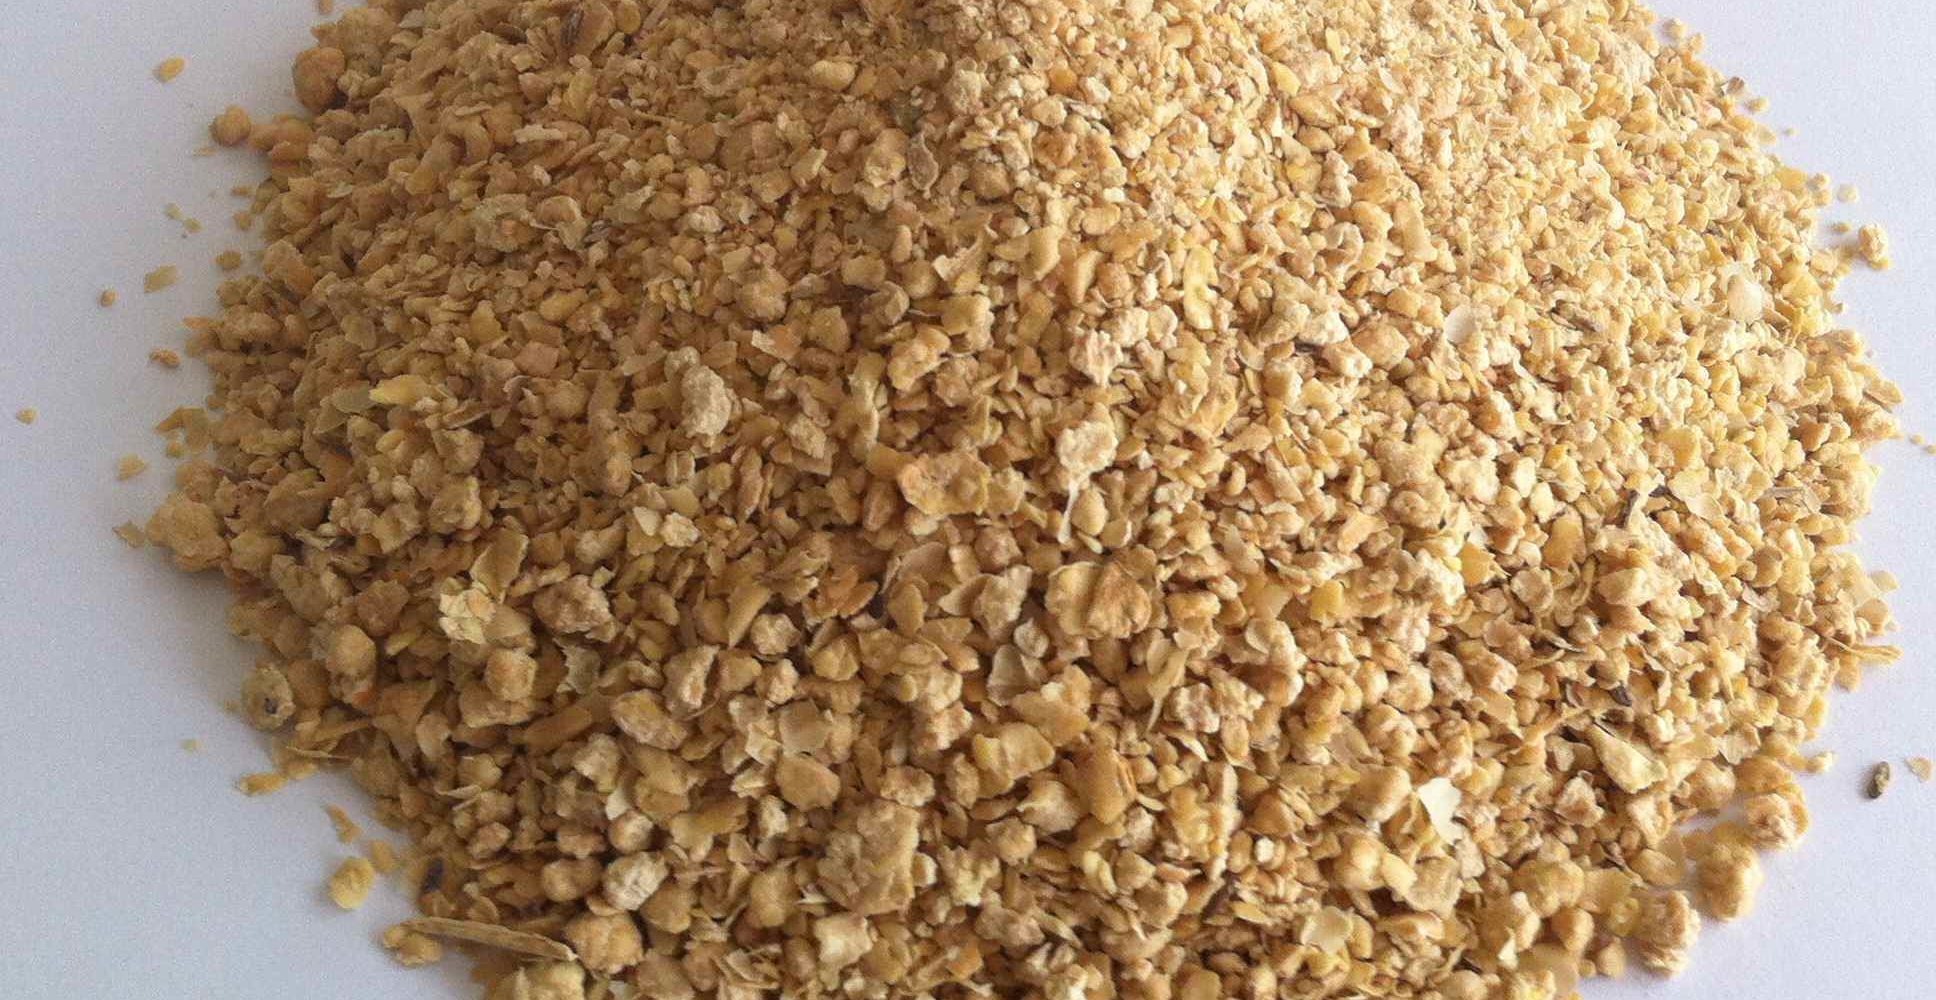 Anti-Dumping Of Organic Soybean Meal Complain Takes Center Stage